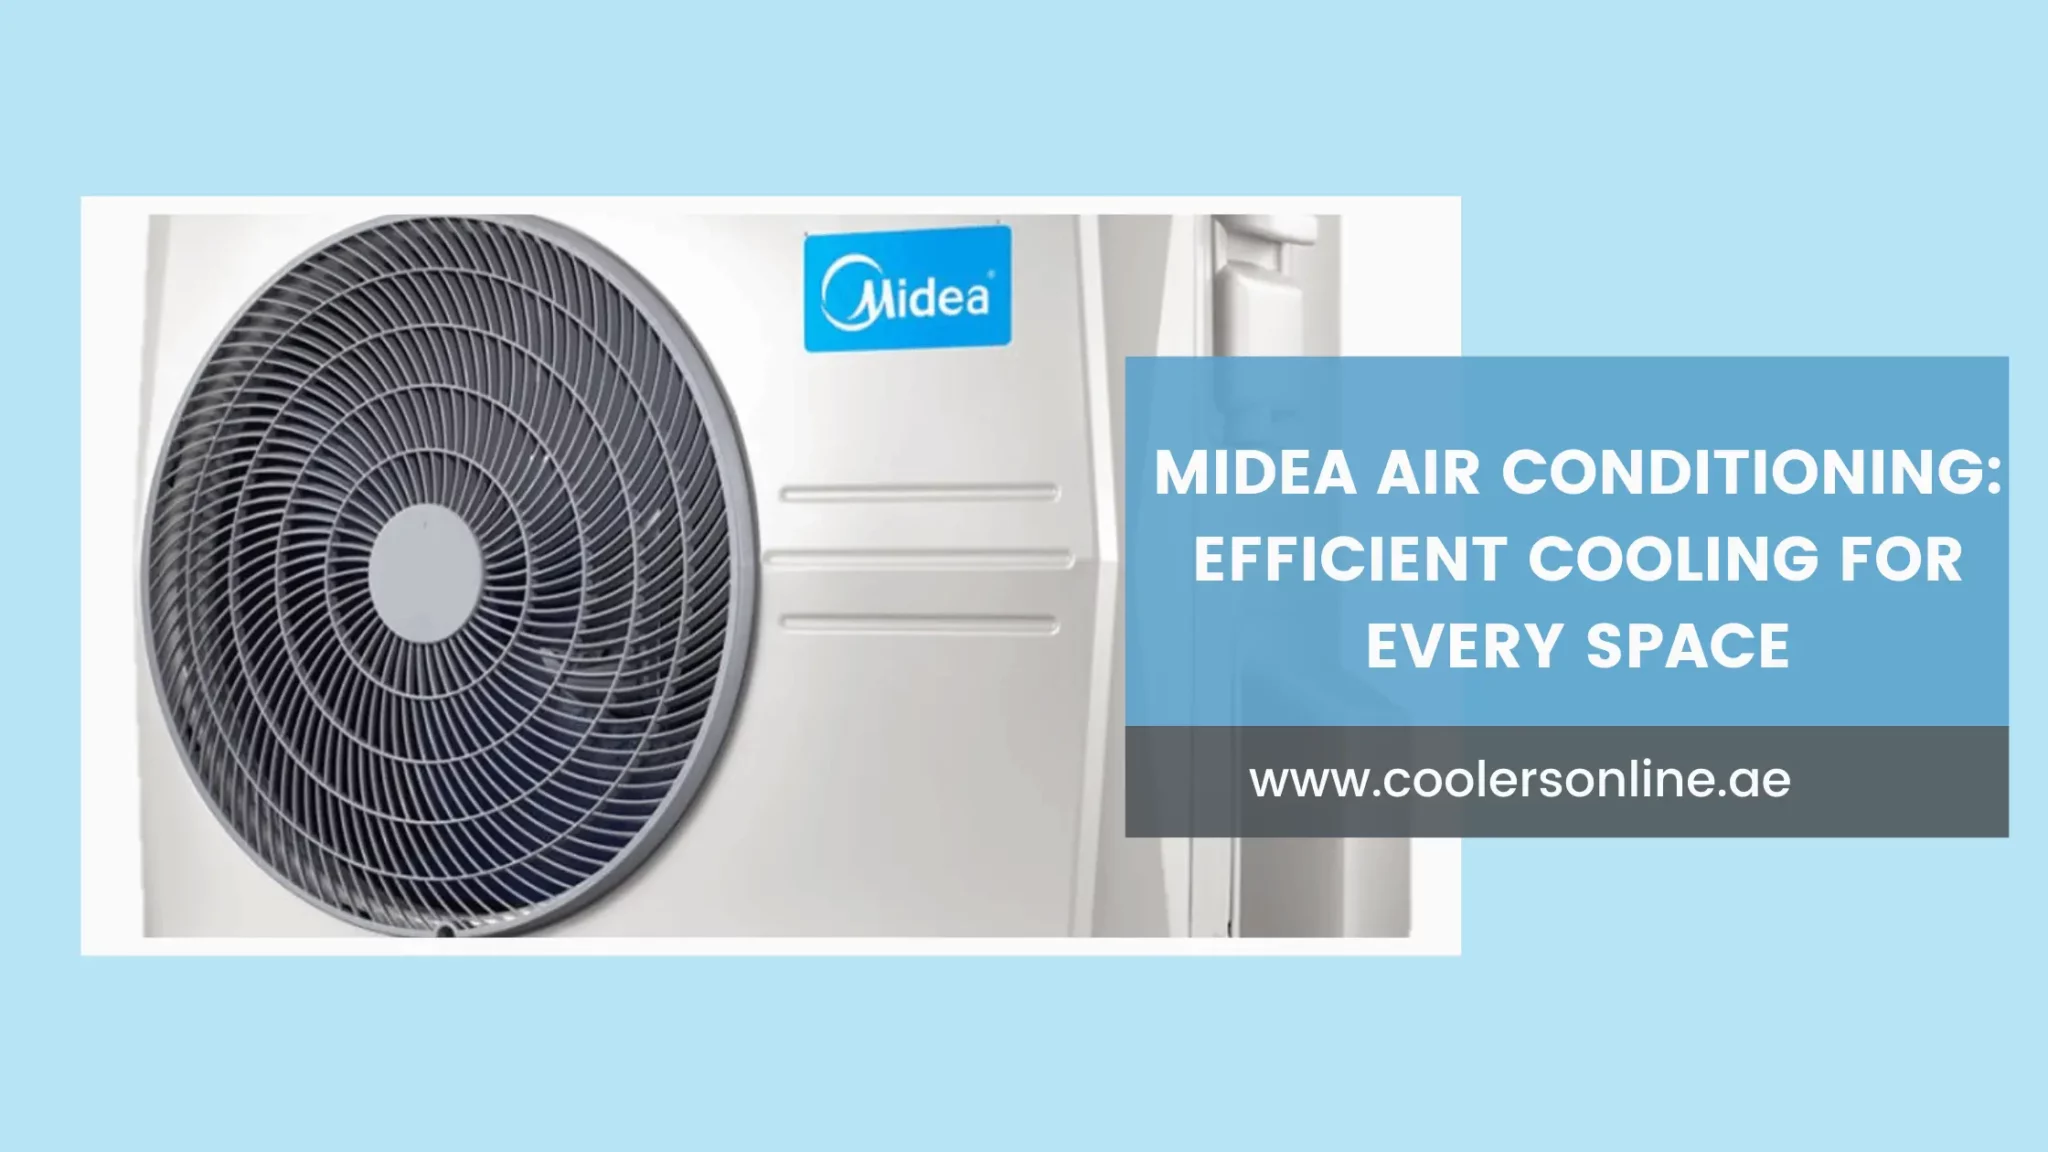 Midea Air Conditioning: Efficient Cooling for Every Space